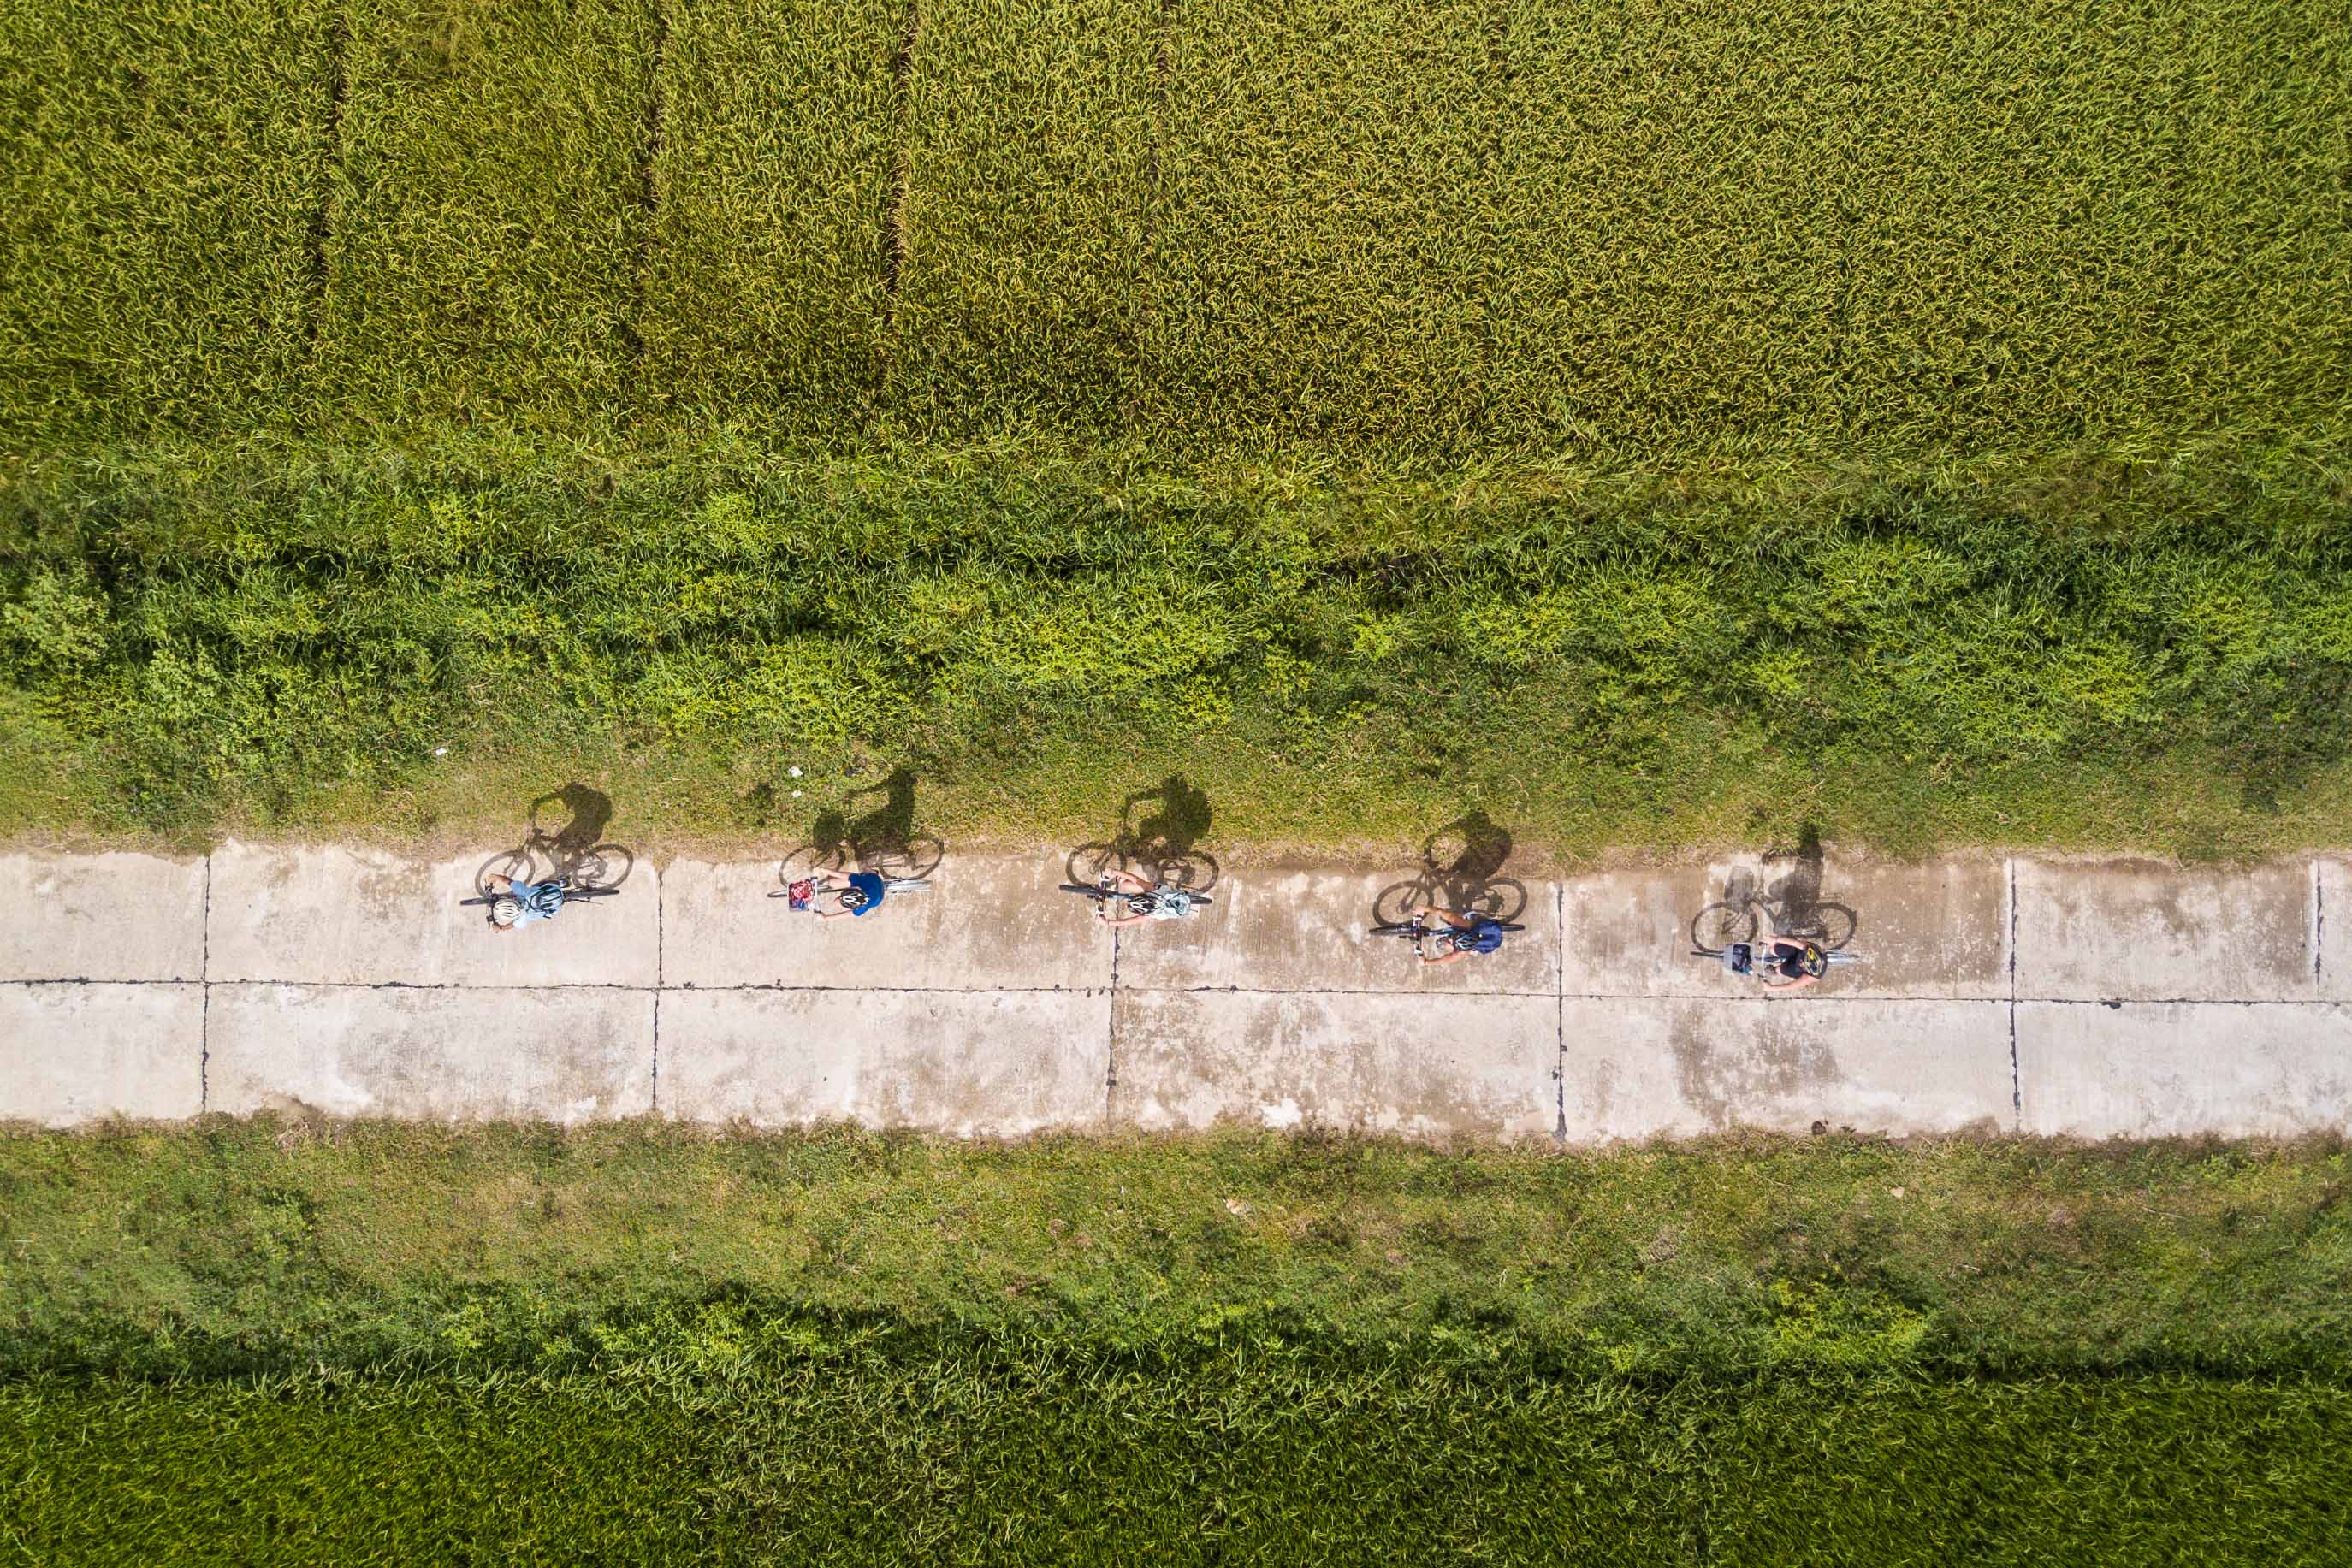 Cycling across the rice fields